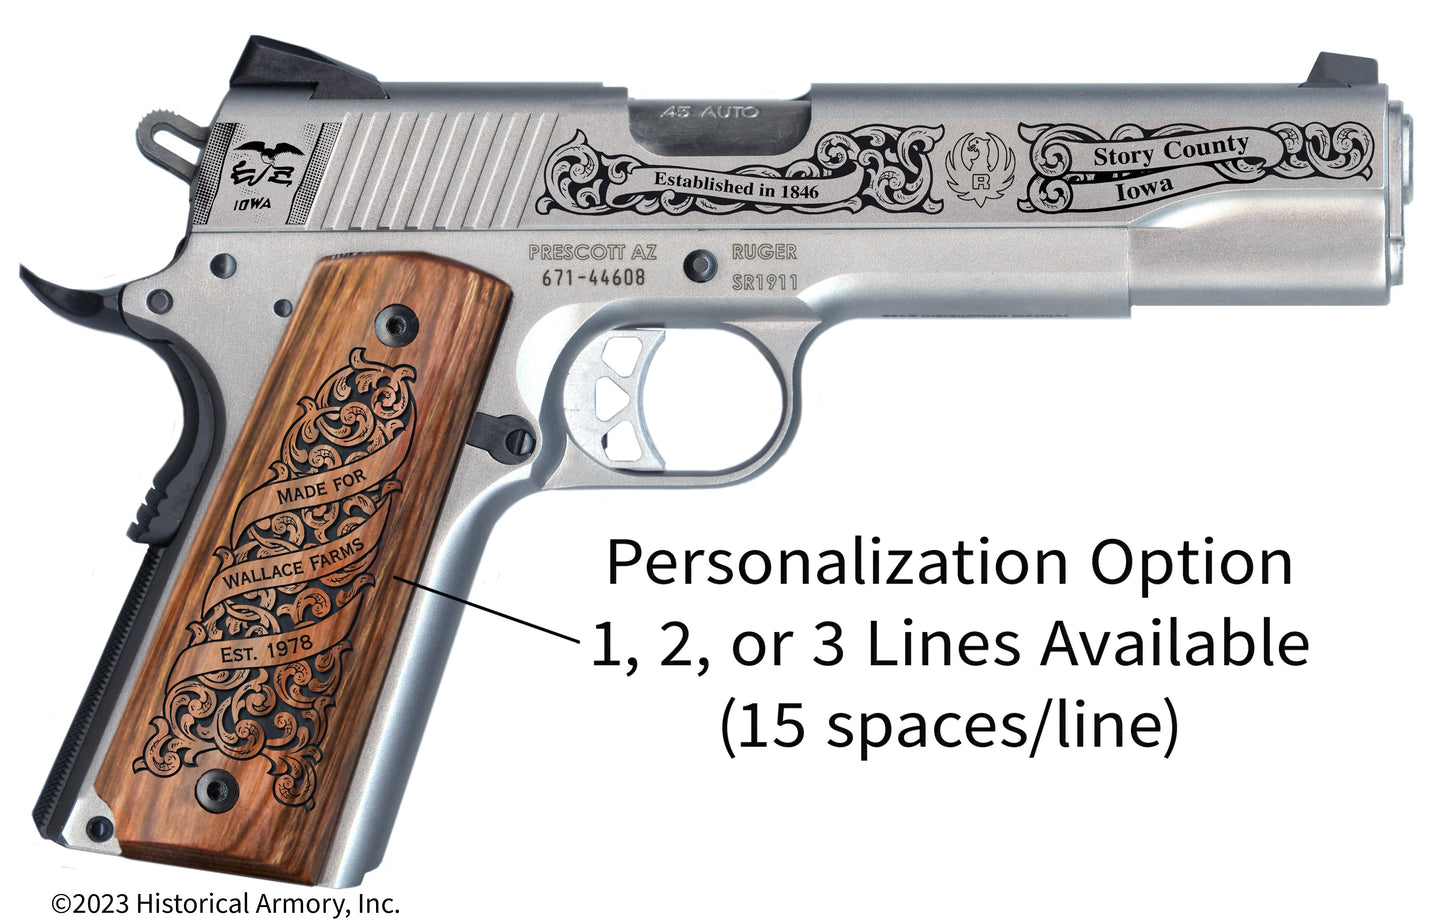 Story County Iowa Personalized Engraved .45 Auto Ruger 1911